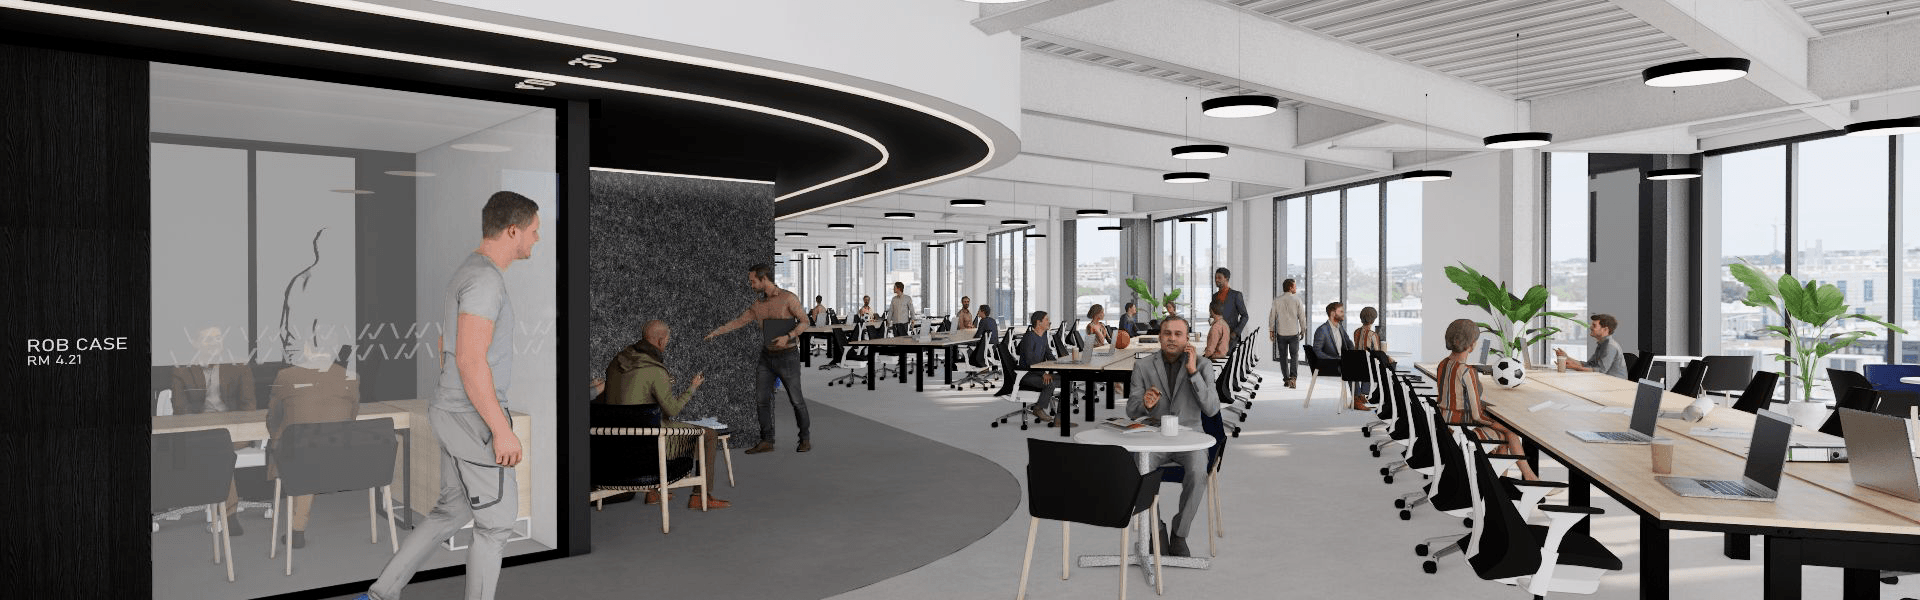 office area render for whoop